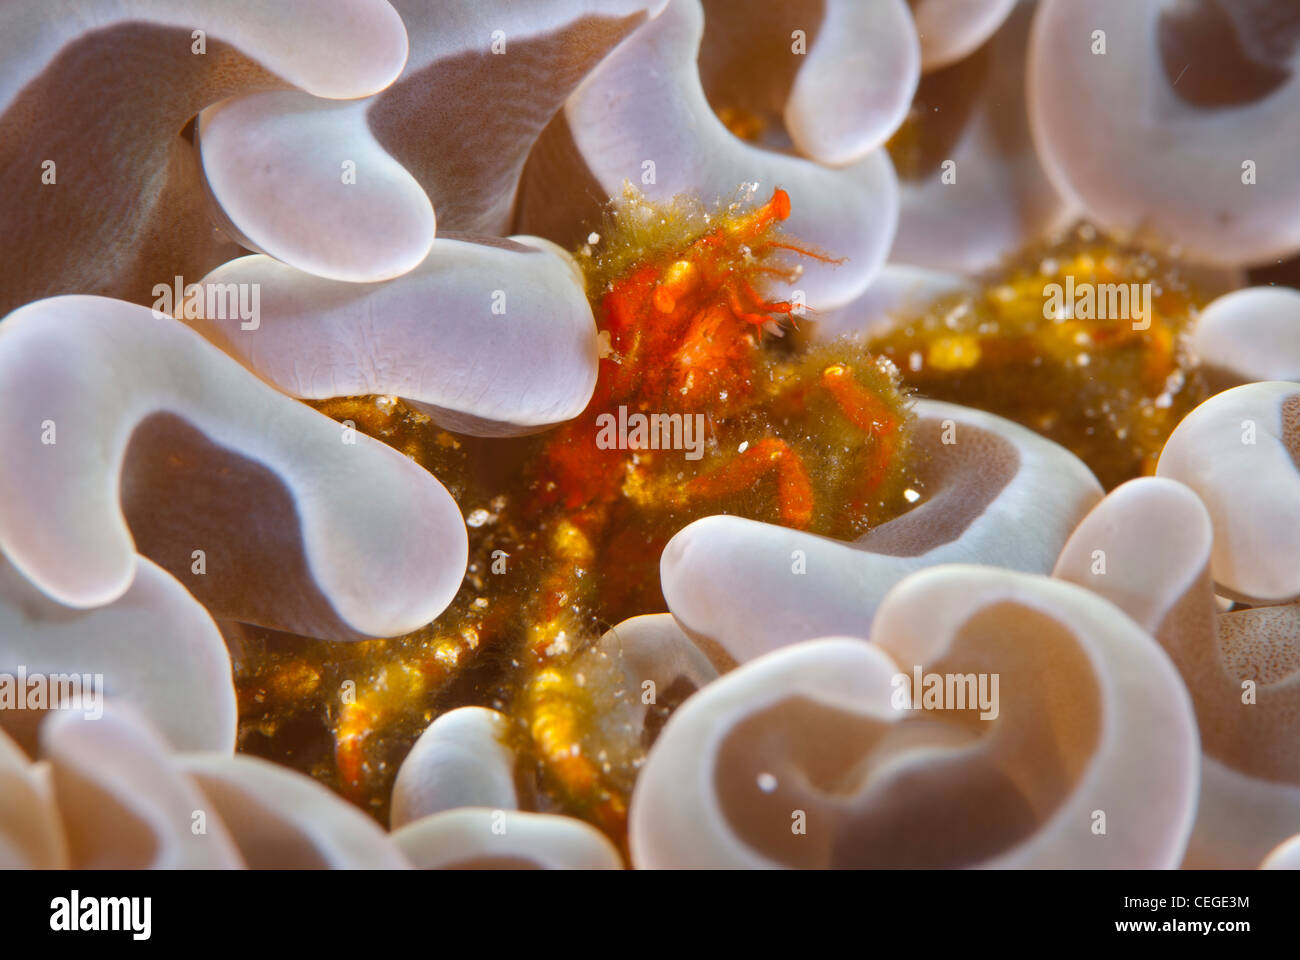 An Orangutan crab (Oncinopus) comfortably sits on an anemone. North Sulawesi Indonesia Stock Photo